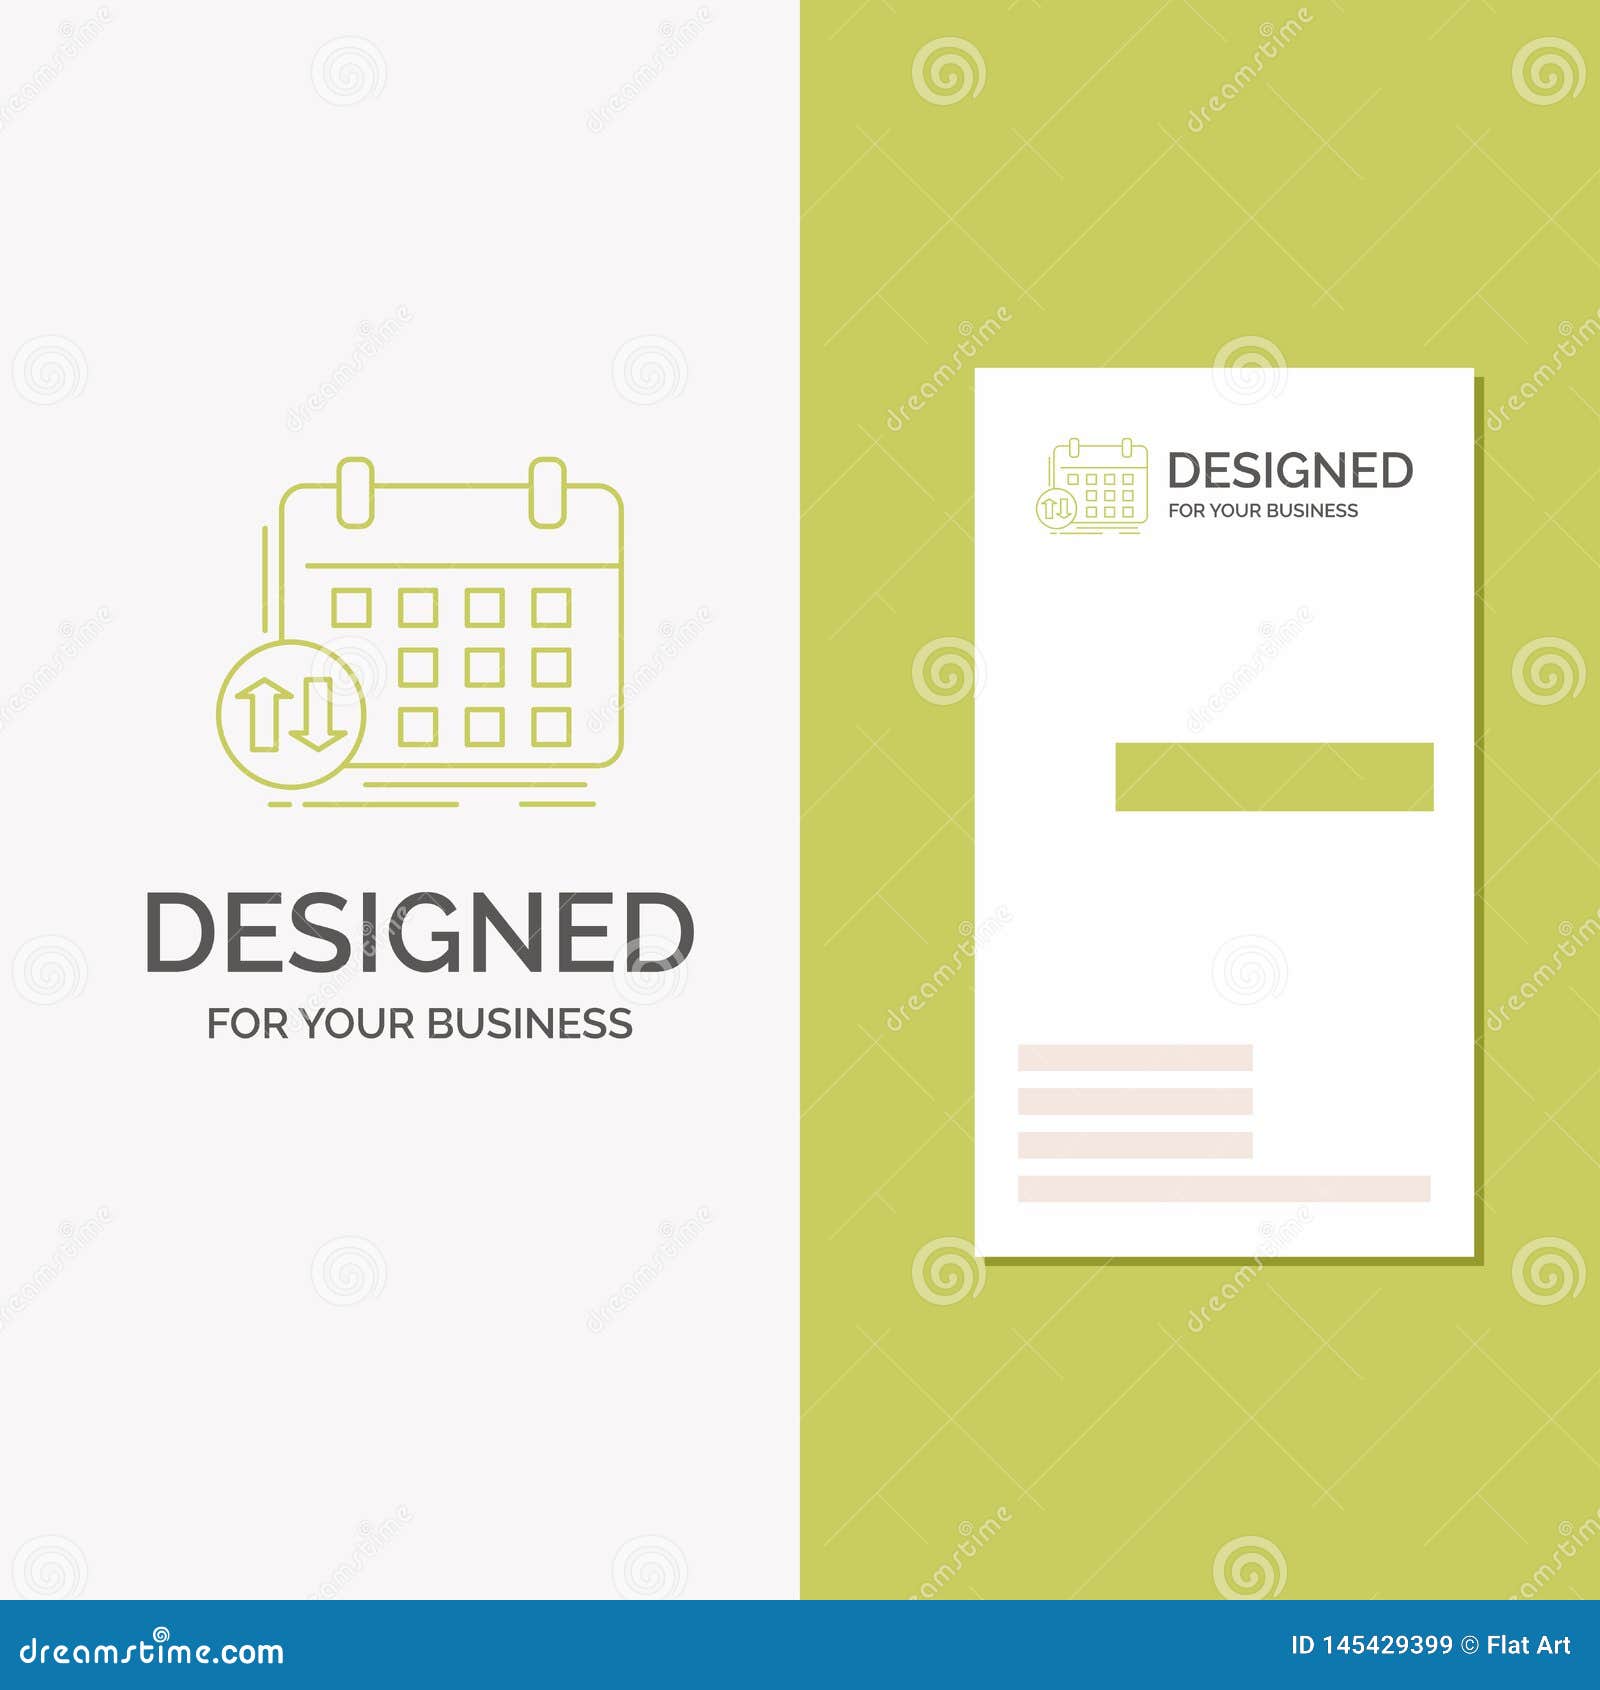 Appointment Business Card Template from thumbs.dreamstime.com